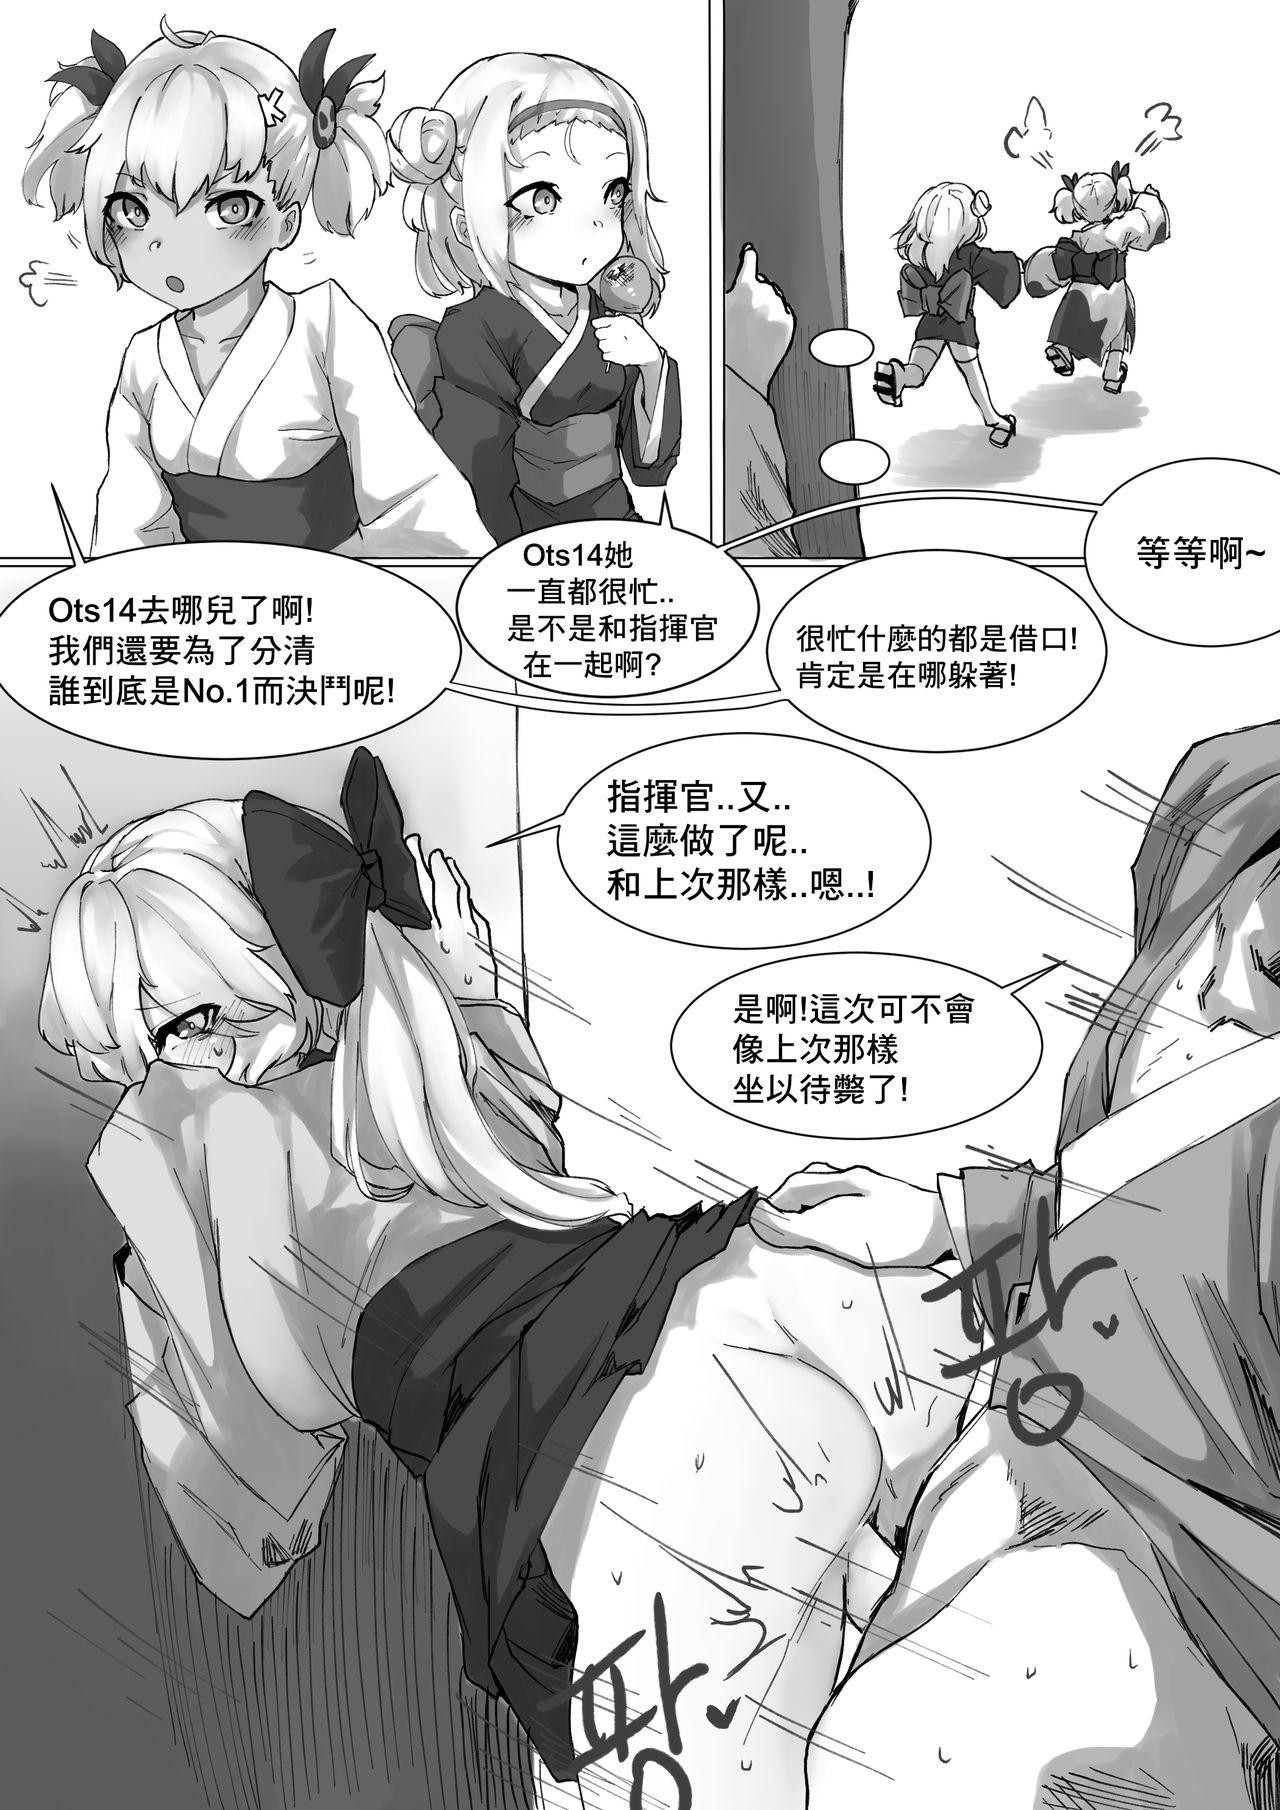 Tesao How To Use OTS-14 - Girls frontline Snatch - Page 10